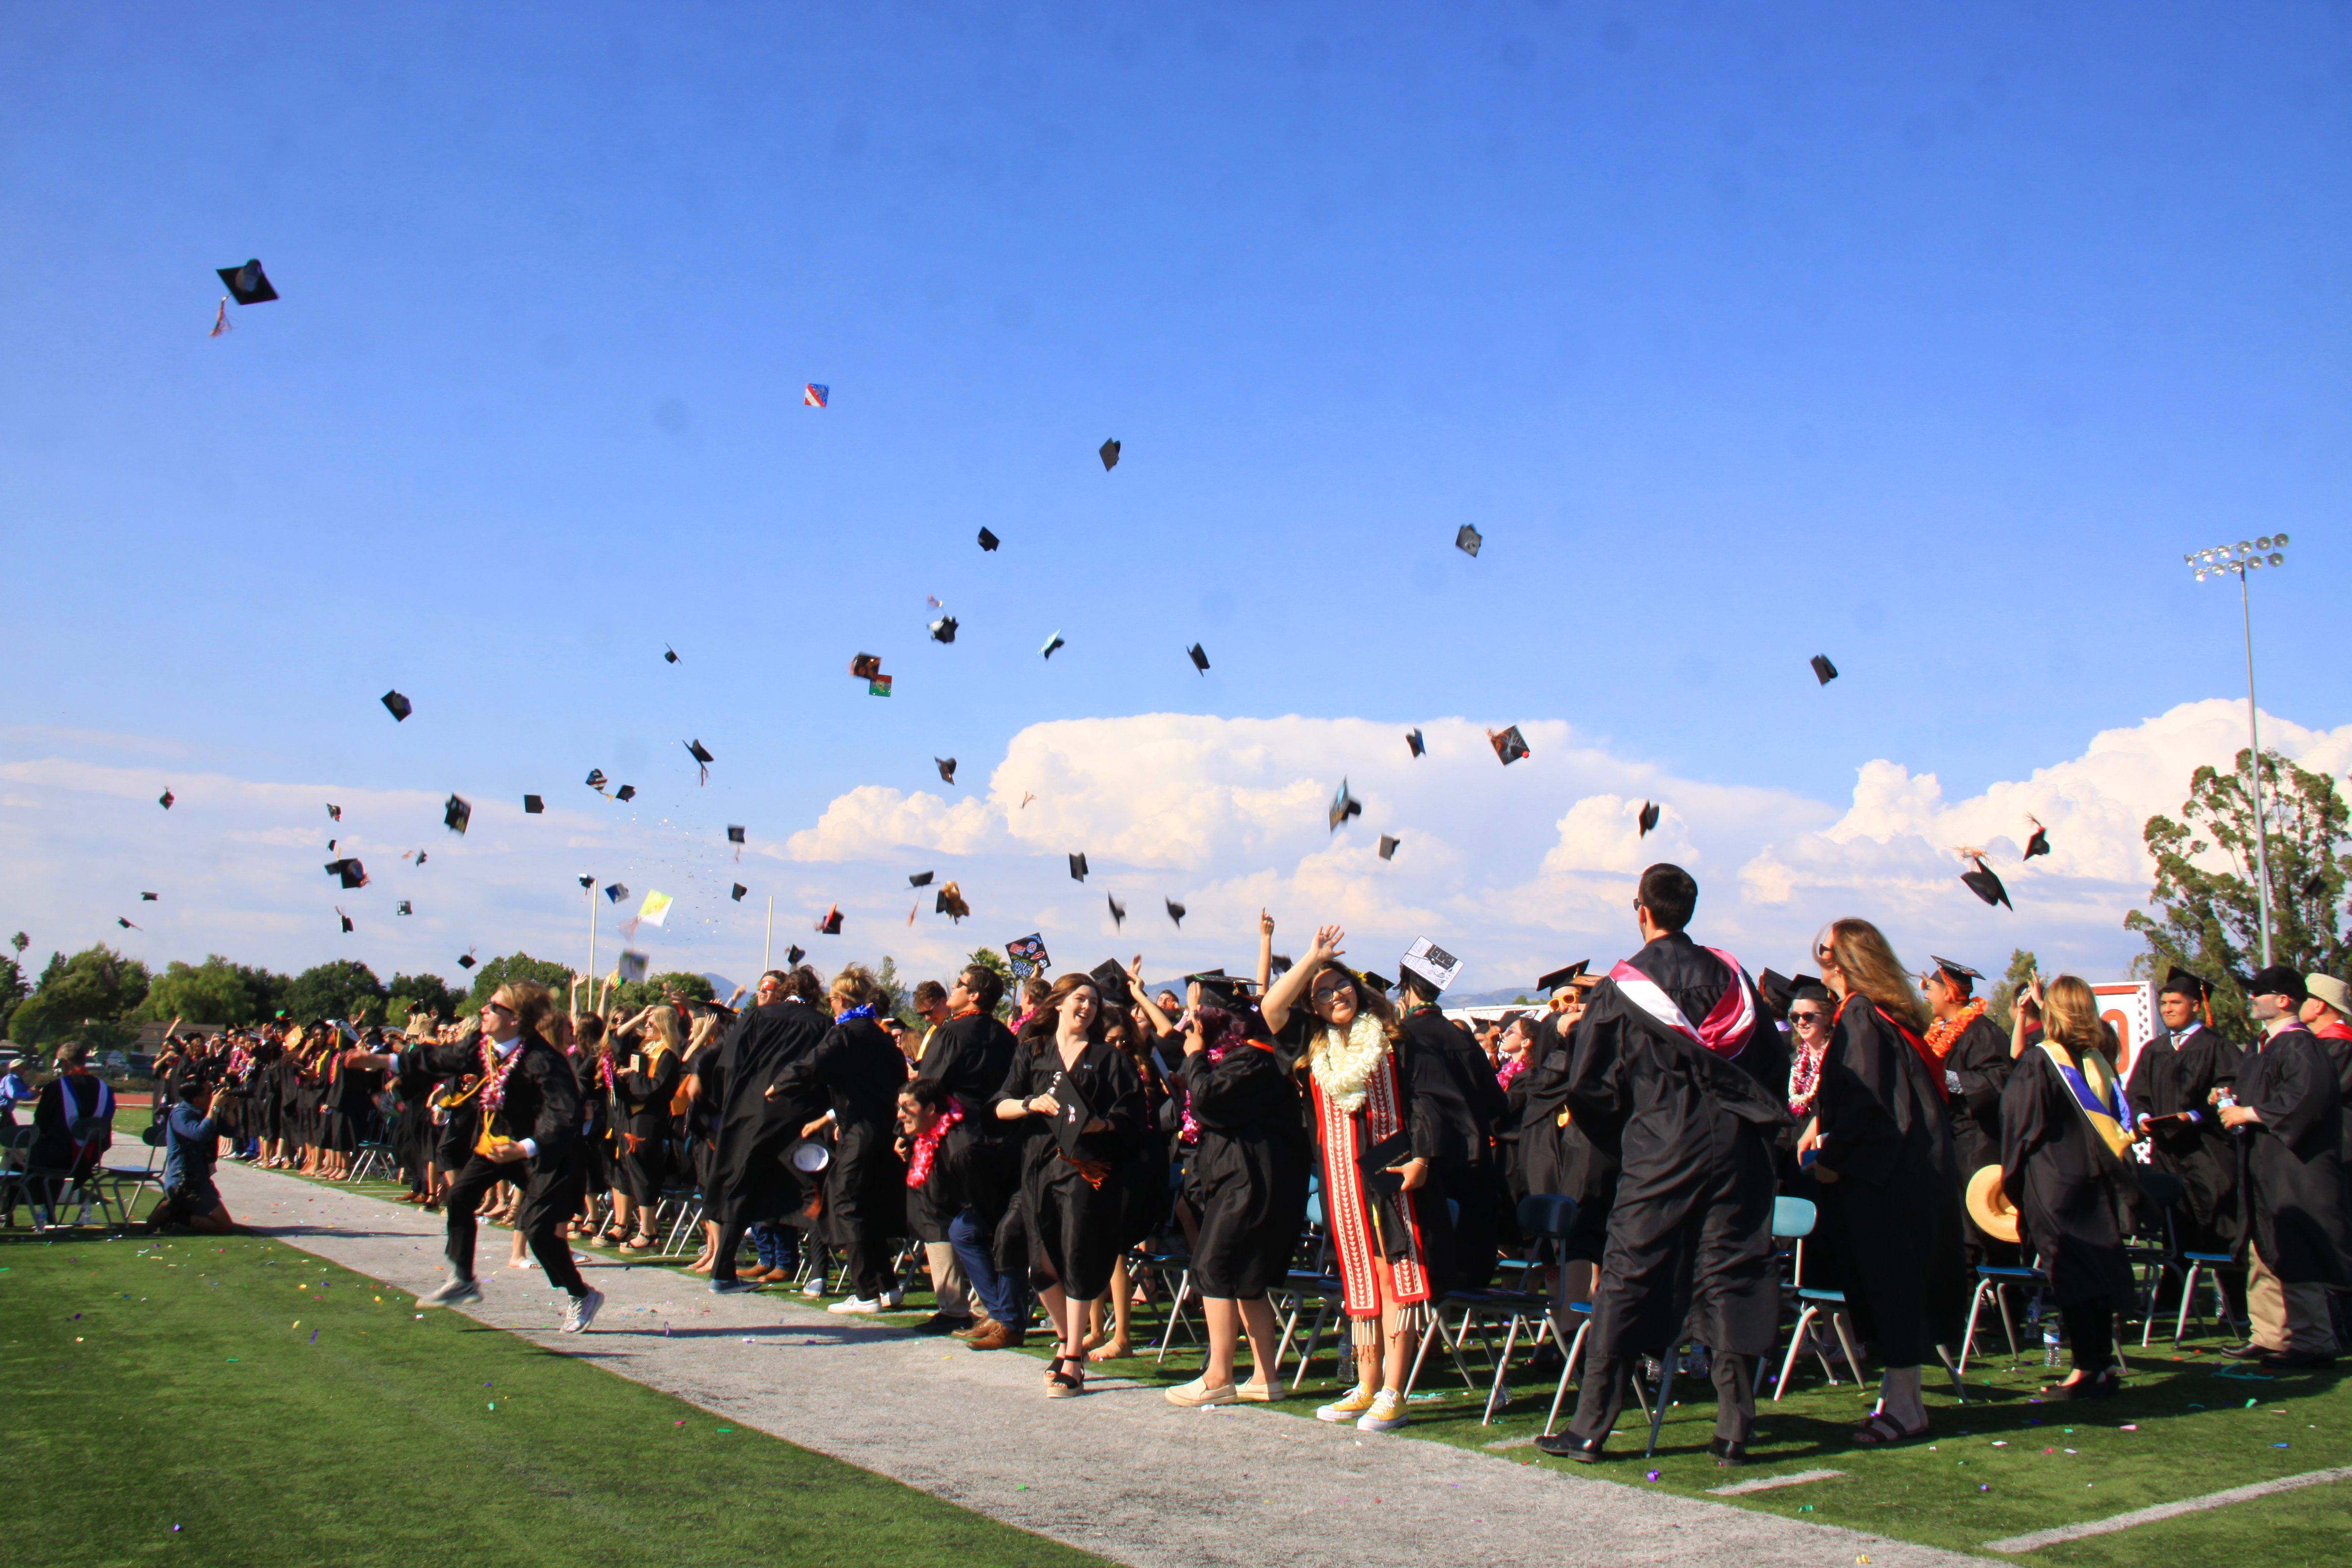 Santa Ynez Valley High School Celebrates Class of 2019 at Commencement